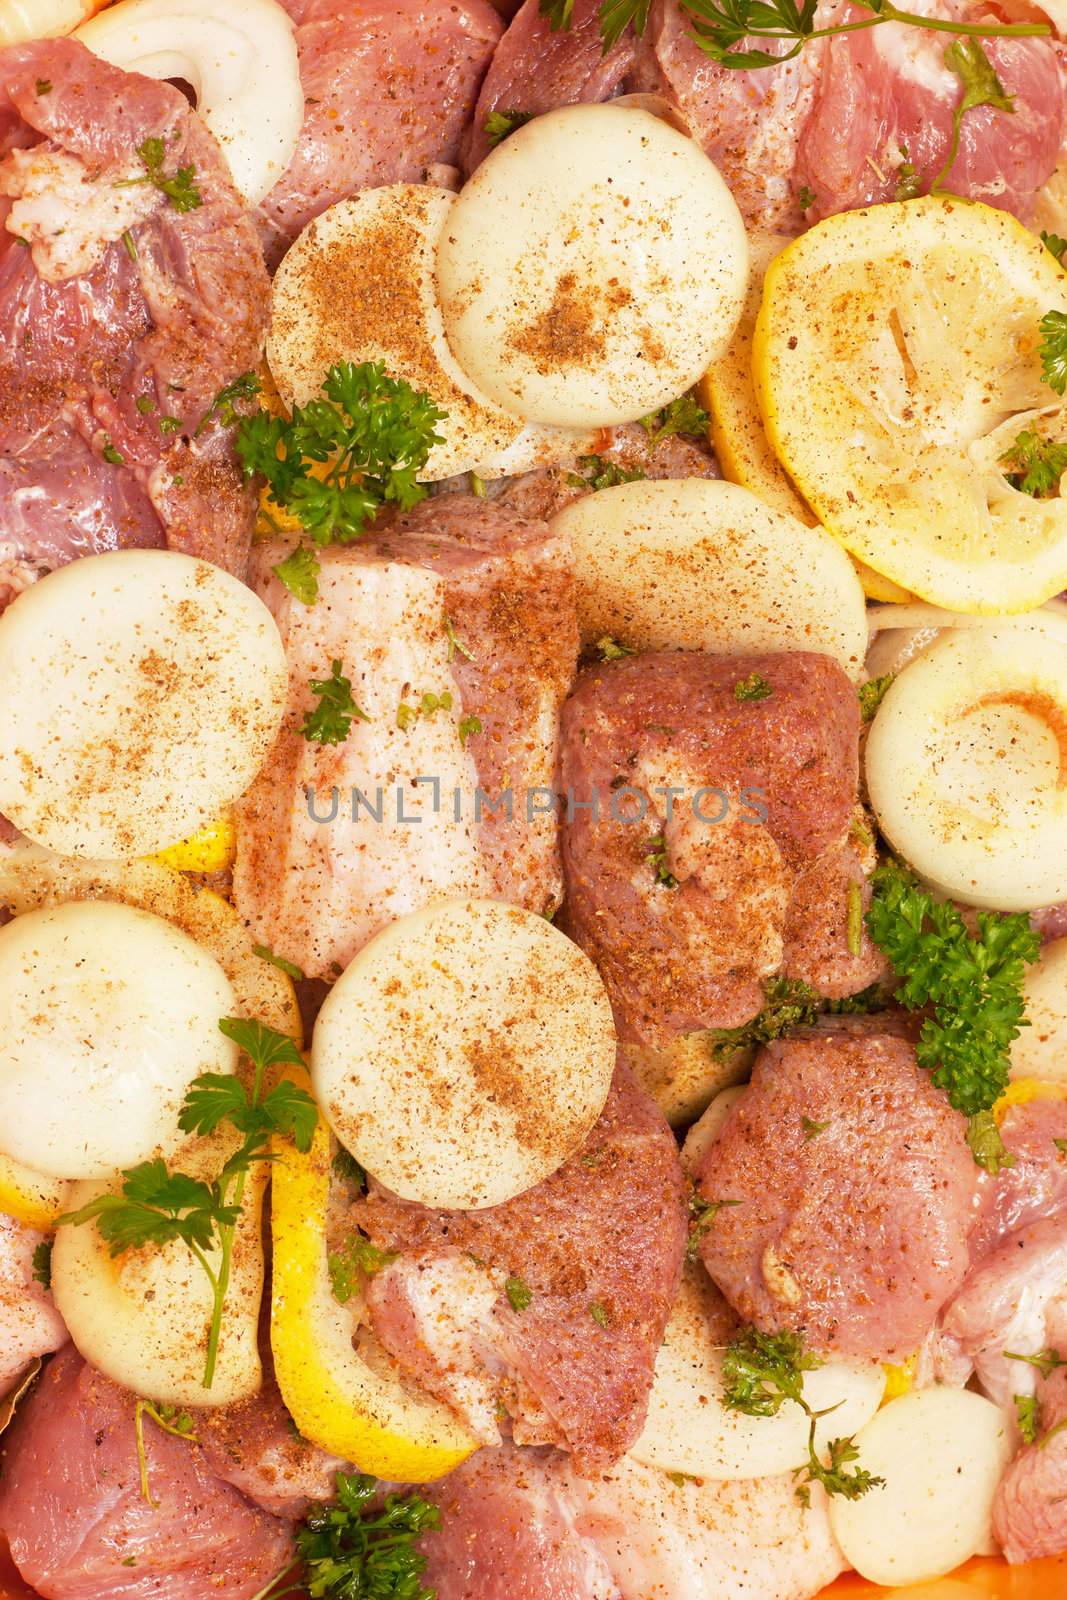 Closeup view of spiced uncooked meat with fresh parsley